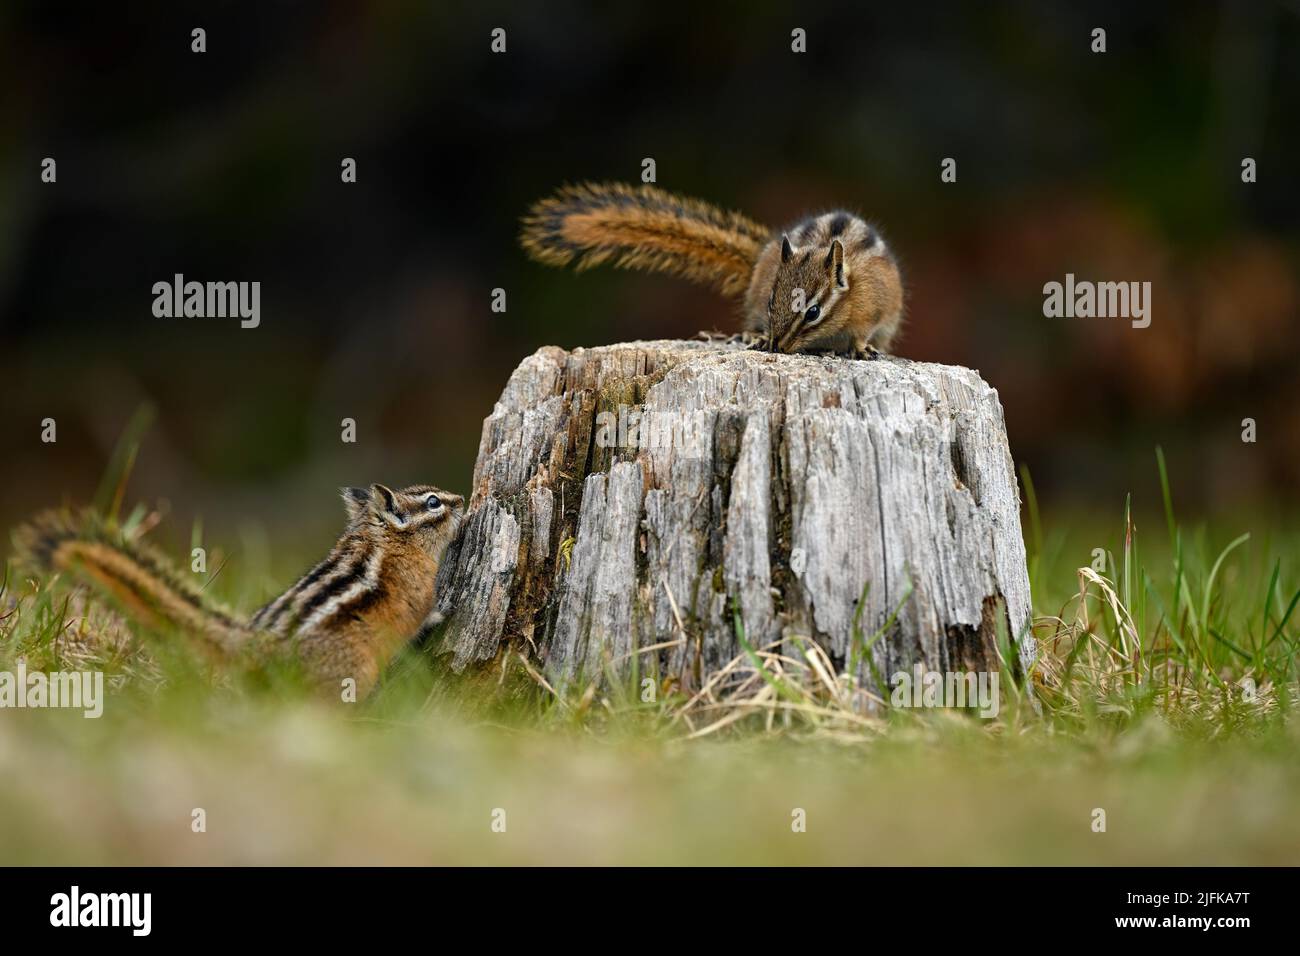 A cute and playful chipmunk running, jumping, sitting and eating on an old tree trunk in E. C. Manning Park, British Columbia, Canada. Stock Photo